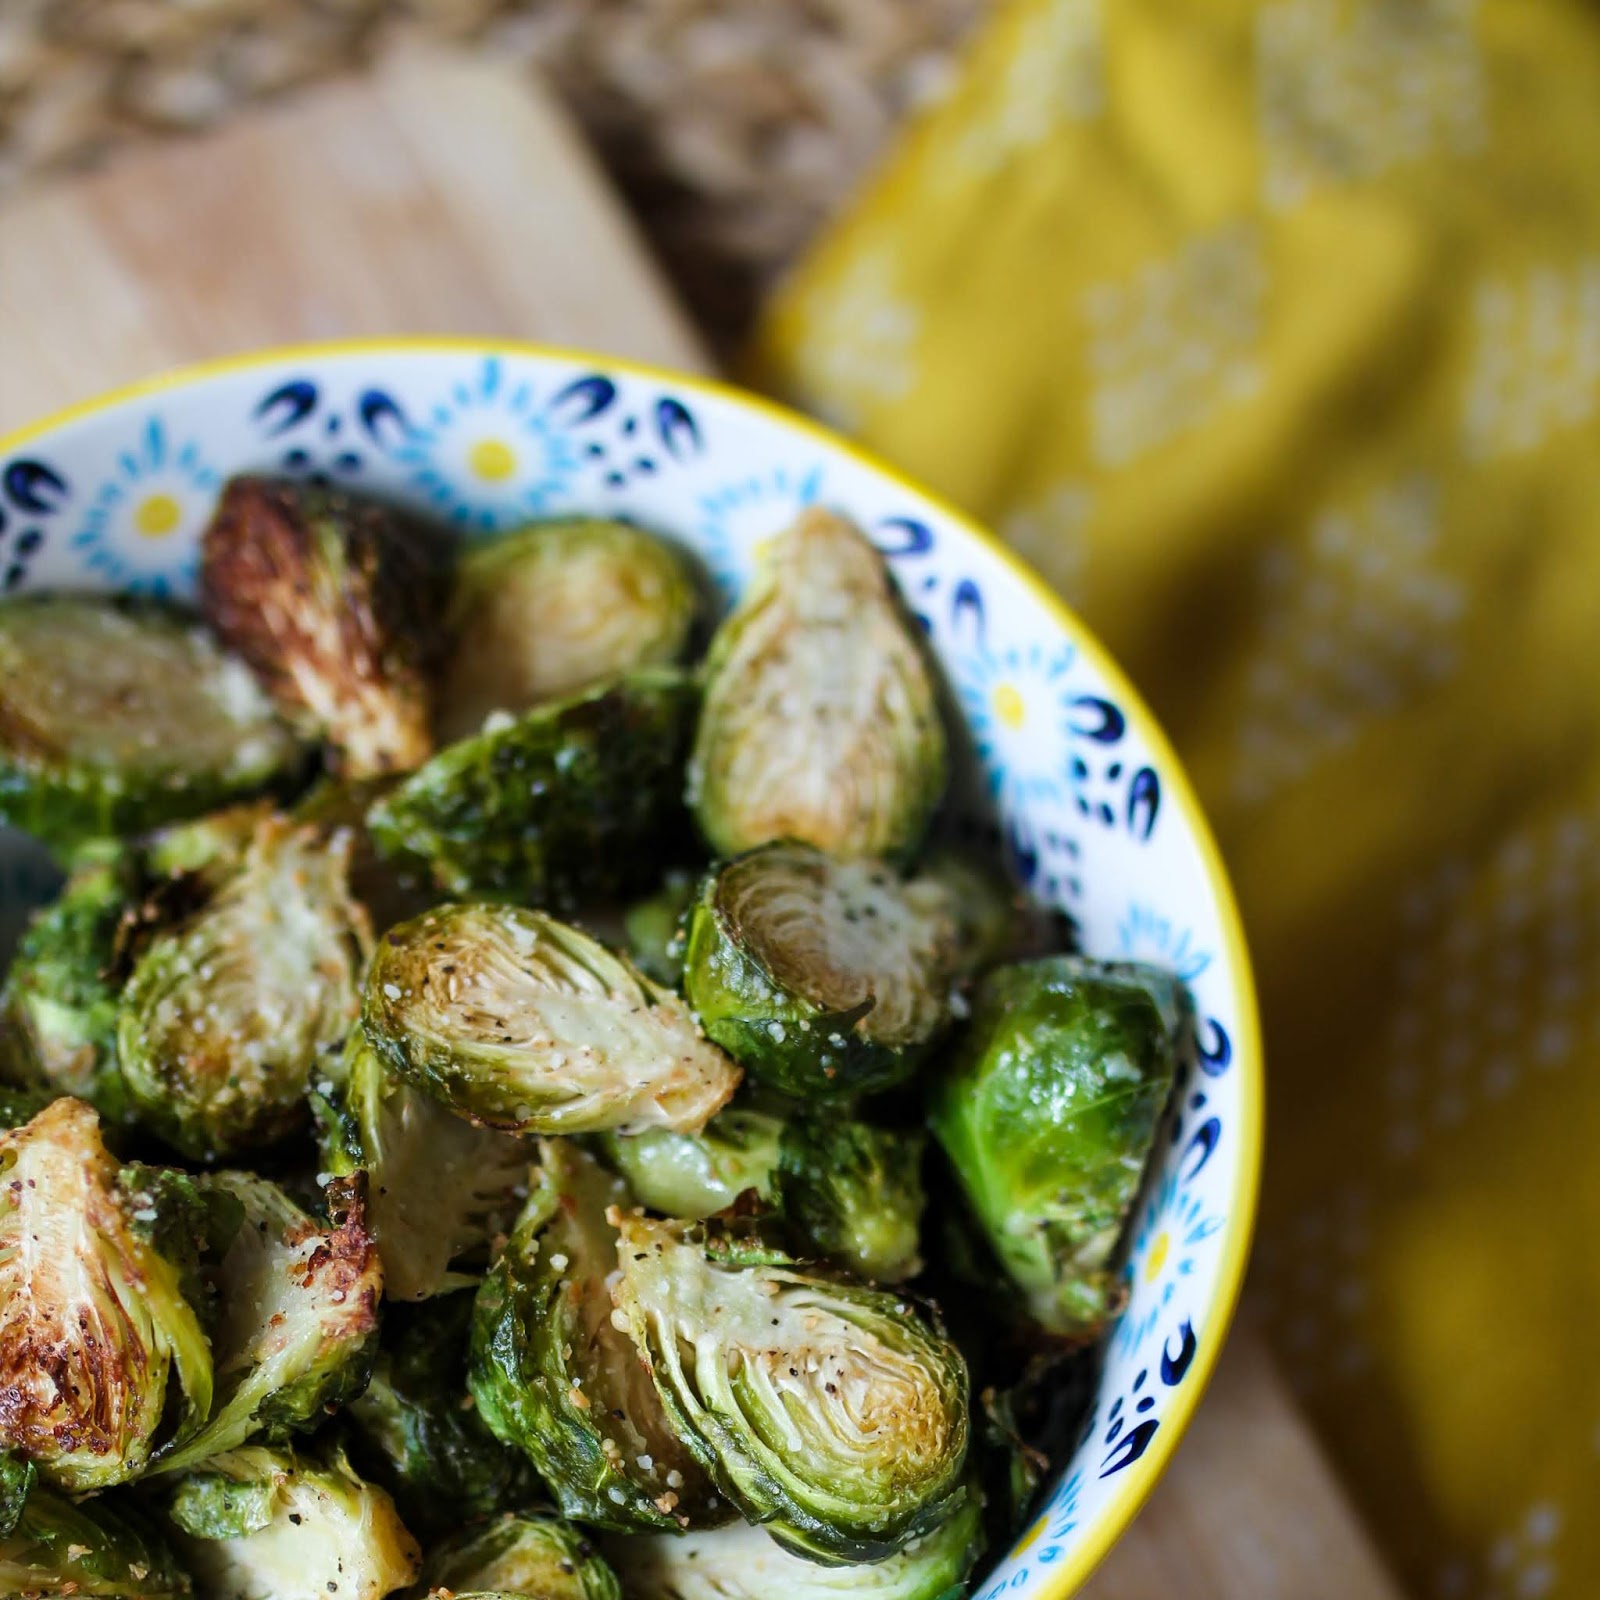 crispy brussel sprout recipes, brussel sprouts recipes, roasted brussel sprouts , parmesan roasted Brussel sprouts, how to roast Brussel sprouts, easy Brussel sprouts recipes, best Brussel sprouts recipes, easy Brussel sprouts, lemon pepper Brussel sprouts, crispy roasted Brussel sprouts, the right way to roast Brussel sprouts